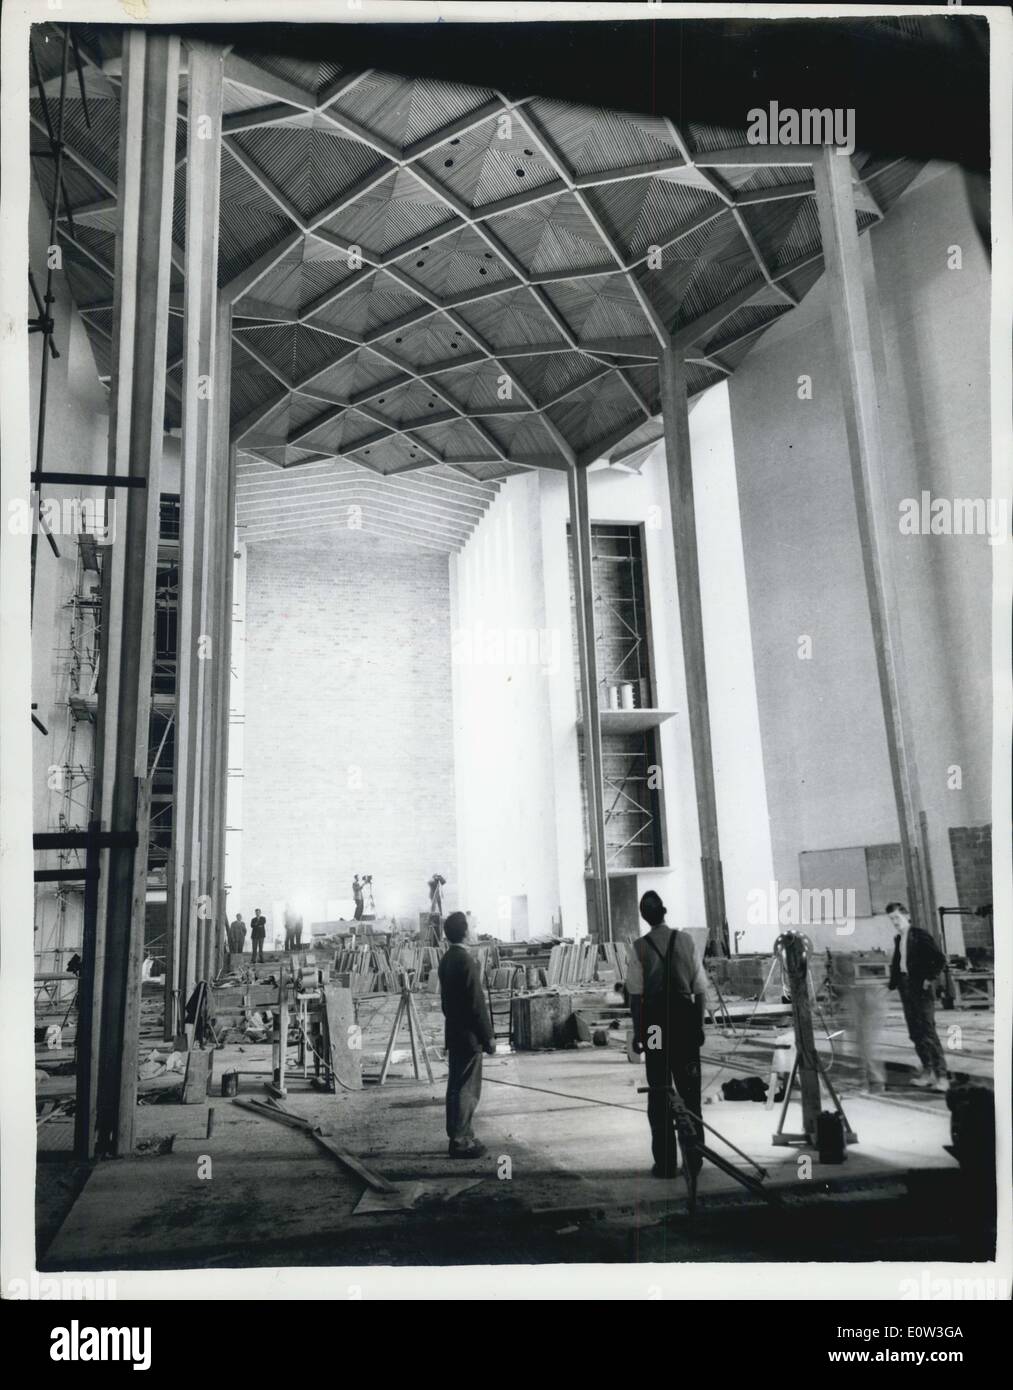 May 24, 1961 - Press View of New Coventry Cathedral Progress.. View From NAVE - Looking Towards High Altar. Members of the press visited Coventry Cathedral in connection with the conference being held on Wednesday 24th. May - a year before the buildings Consecration.. Scaffolding is being removed inside the building to reveal some of the architectural splendour.. Keystone Photo Shows:- View from the NAVE looking towards the High Altar and Lady Chapel - of the new Coventry Cathedral. Stock Photo